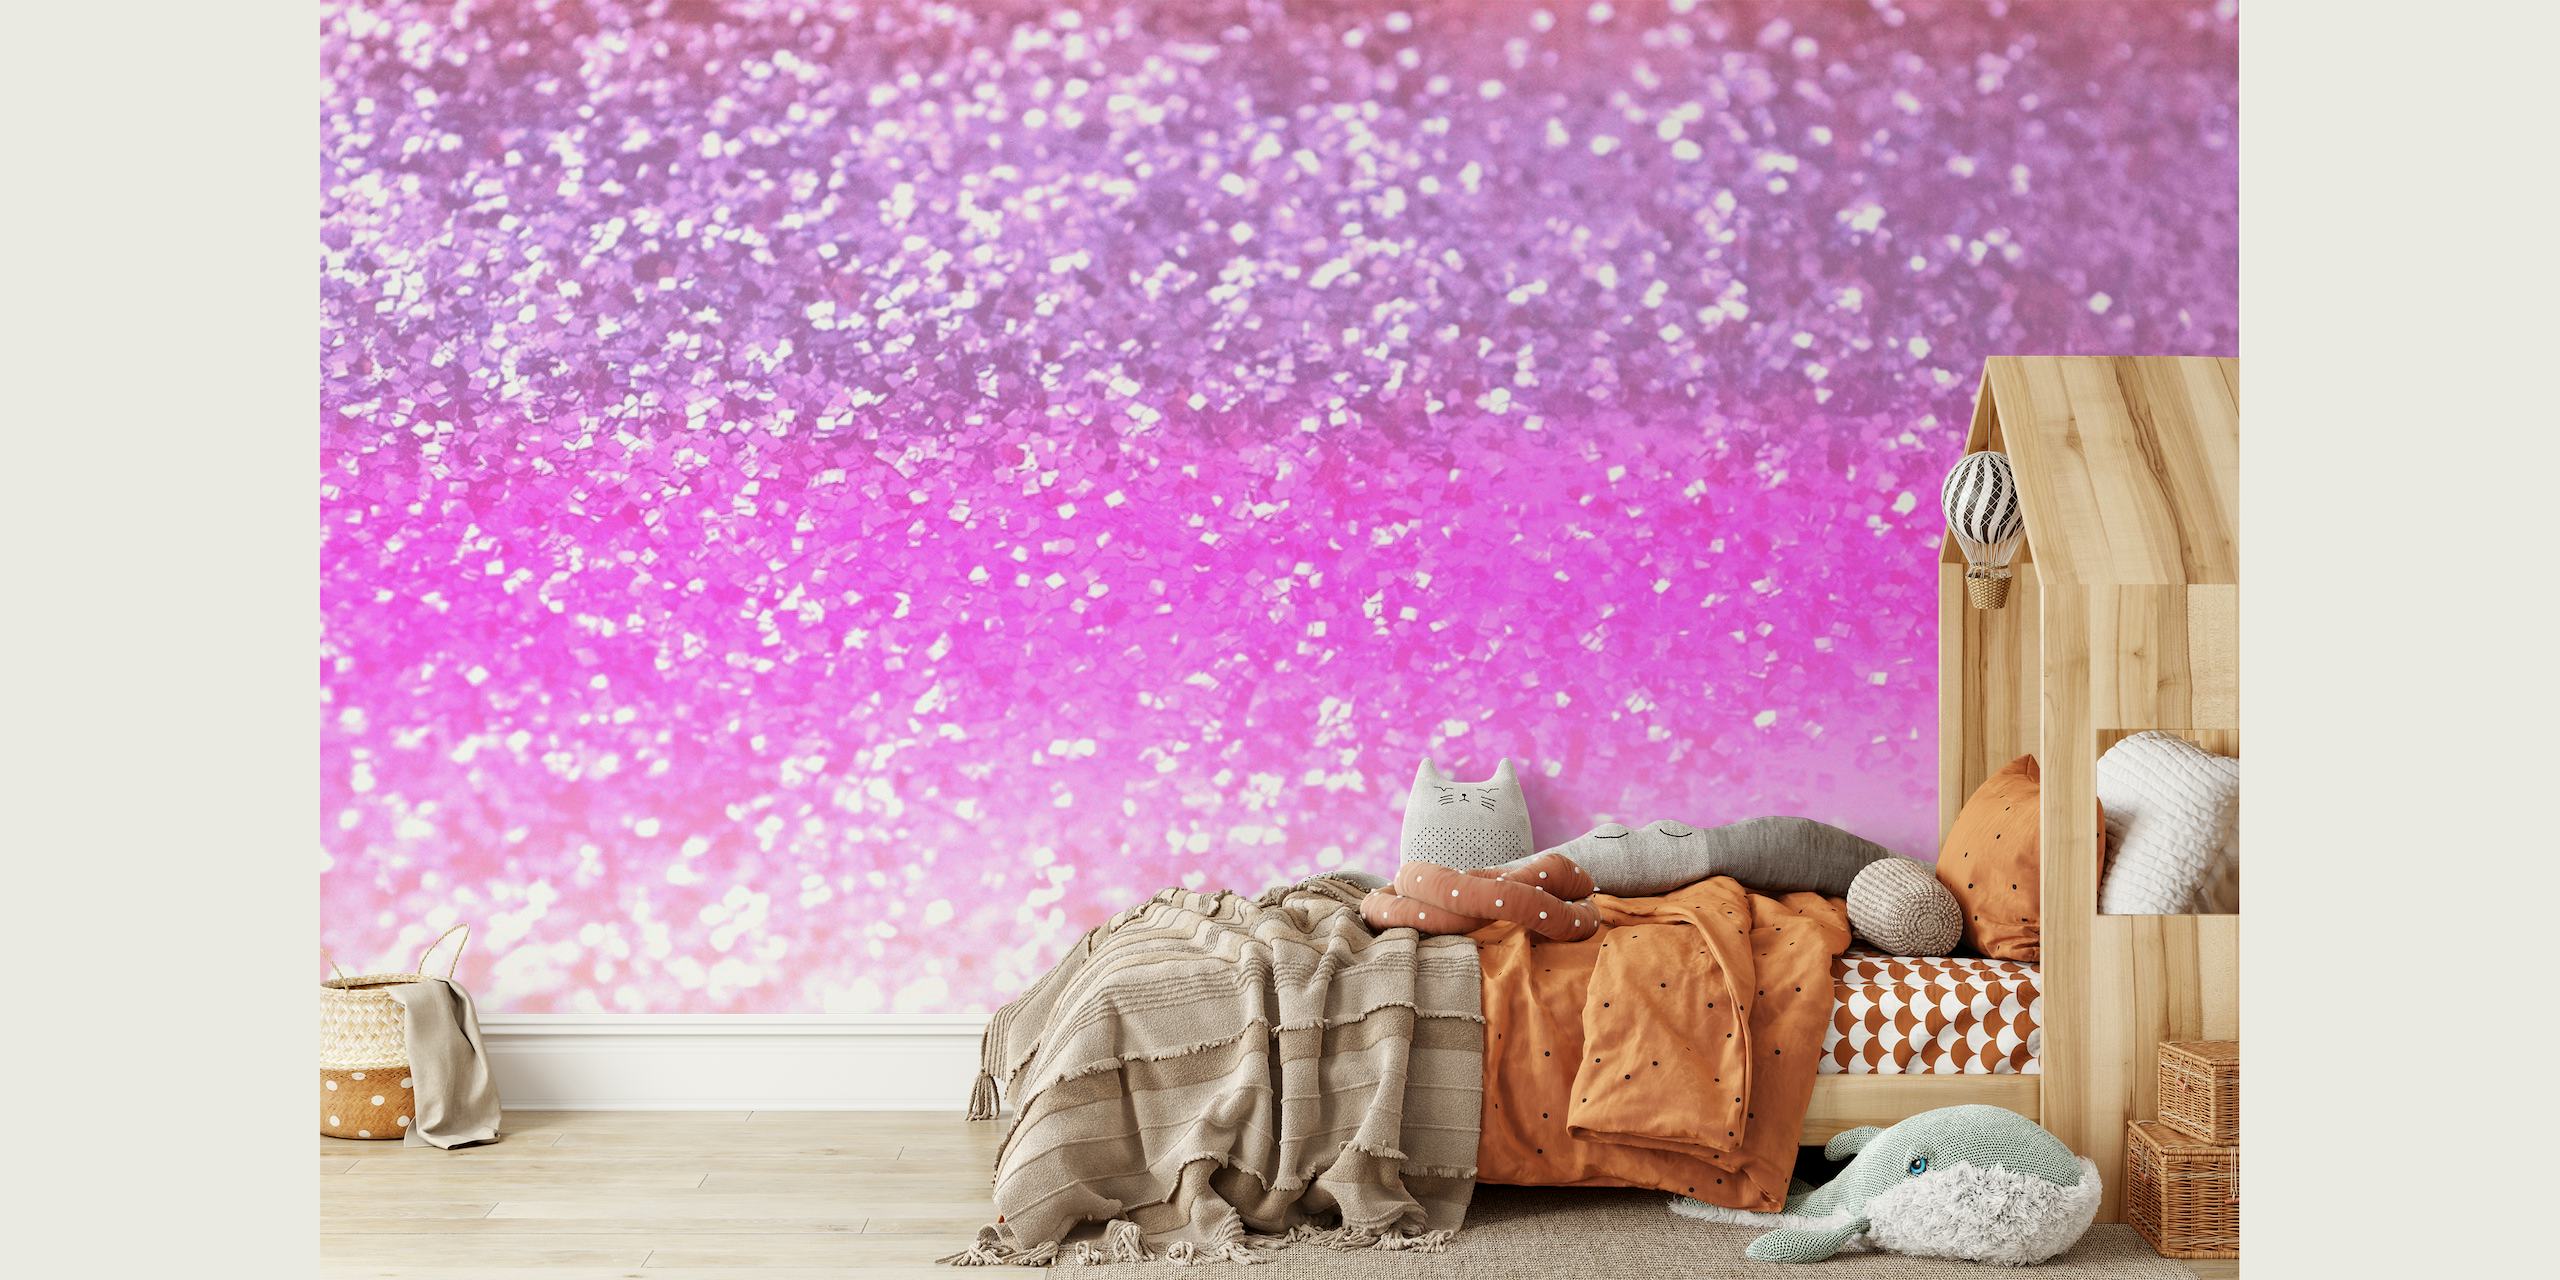 Glittery pink and purple gradient wall mural for a magical room ambiance.